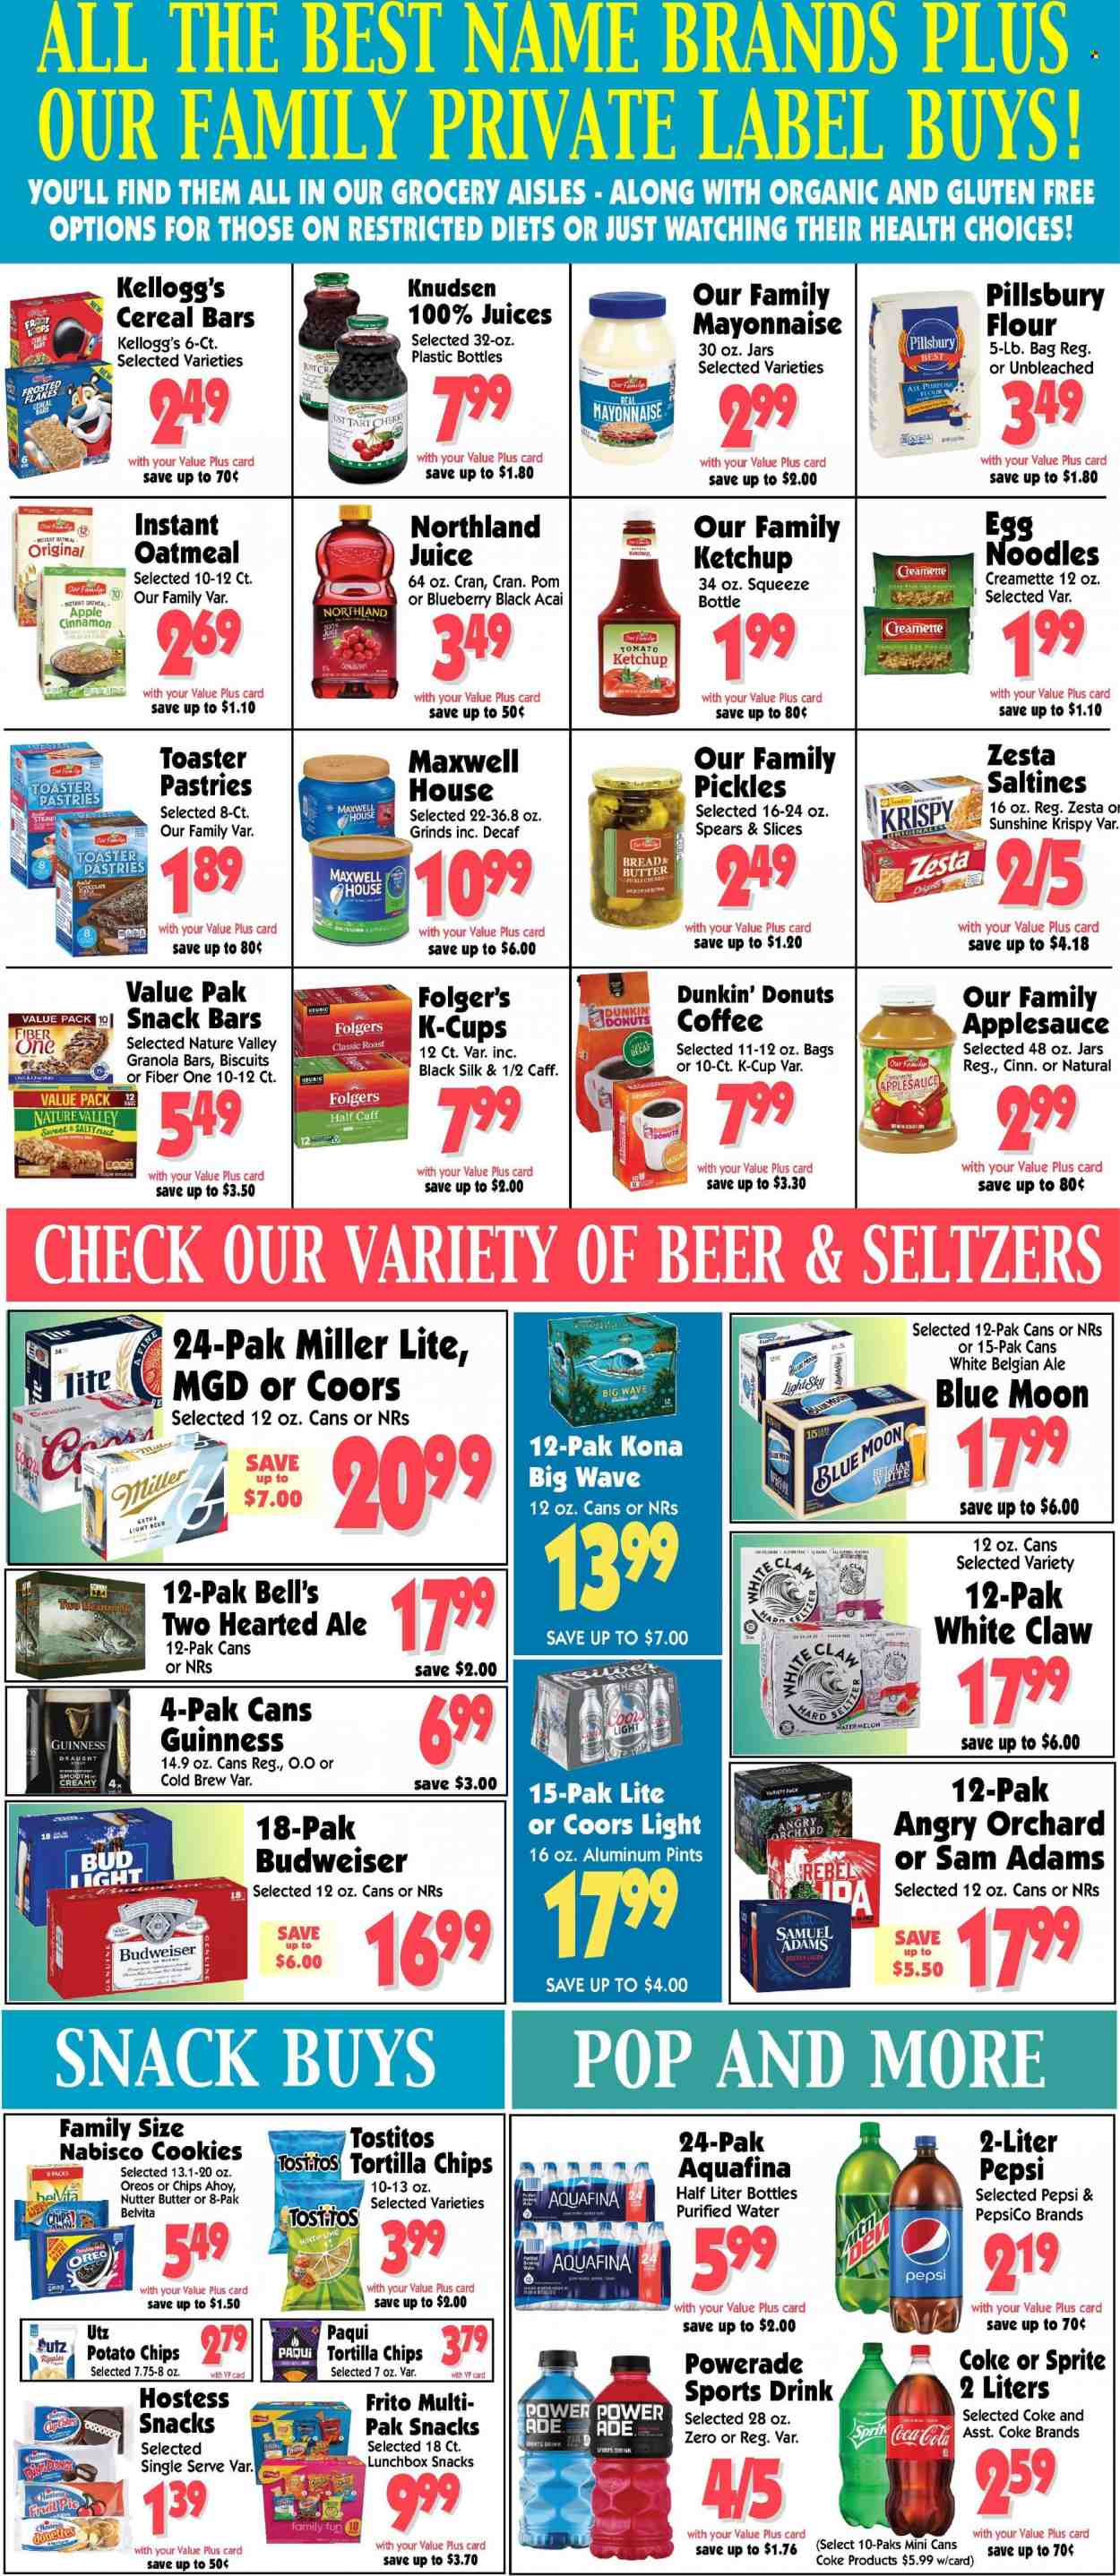 thumbnail - Al's Supermarket Flyer - 03/22/2023 - 03/28/2023 - Sales products - pie, Dunkin' Donuts, watermelon, cherries, Pillsbury, dumplings, noodles, roast, Oreo, Silk, Sunshine, mayonnaise, cookies, cereal bar, Kellogg's, biscuit, snack bar, tortilla chips, potato chips, chips, saltines, Tostitos, all purpose flour, oatmeal, pickles, cereals, granola bar, Frosted Flakes, belVita, Nature Valley, Fiber One, egg noodles, Creamette, cinnamon, ketchup, apple sauce, Coca-Cola, Sprite, Powerade, Pepsi, juice, Coke, Aquafina, purified water, water, Maxwell House, coffee, Folgers, coffee capsules, K-Cups, White Claw, beer, Guinness, Lager, WAVE, Olay, jar, meal box, Budweiser, Miller Lite, Coors, Blue Moon. Page 4.